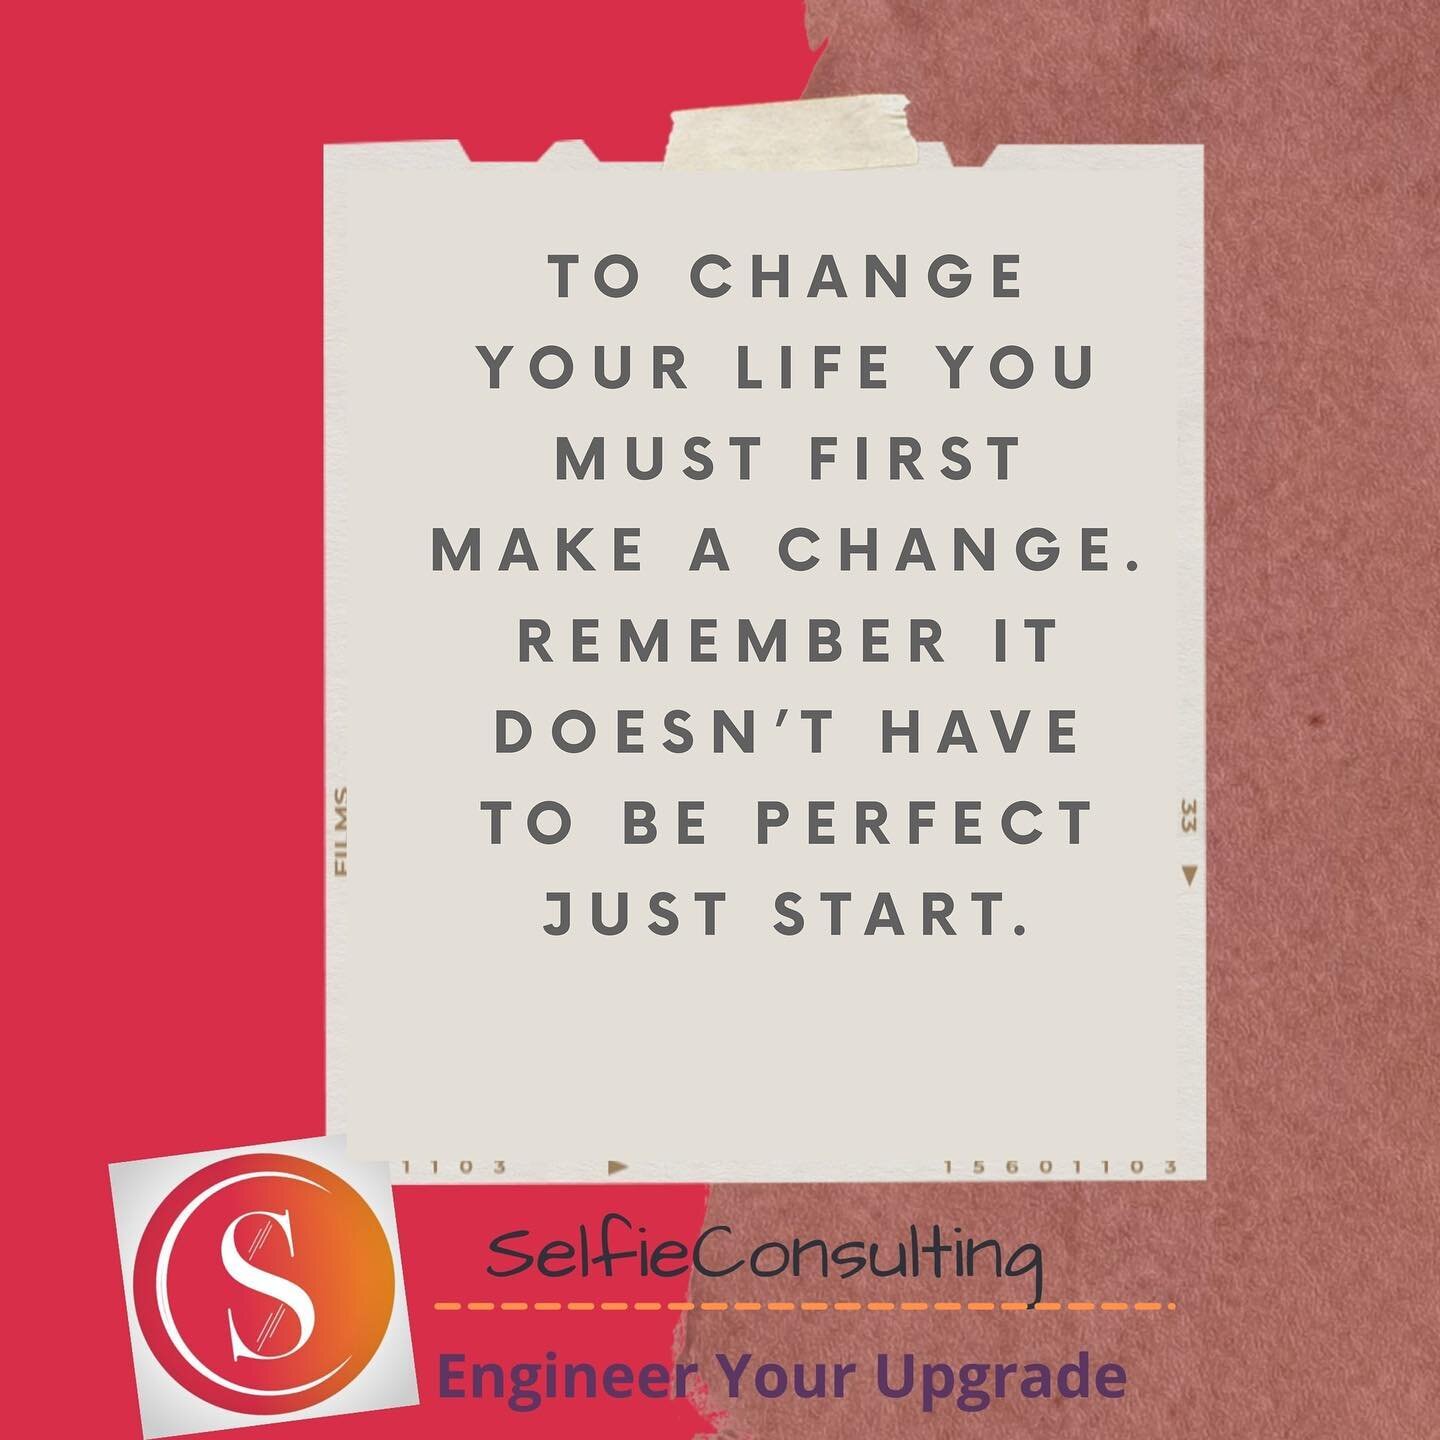 What are you waiting for? Perfection is a road not a destination. Just get started. 

#selfieconsulting #selfieconsultingservices #engineeryourupagrade #putyourownmaskonfirst #inspirational #love #motivation #inspiration #life #inspirationalquotes #q